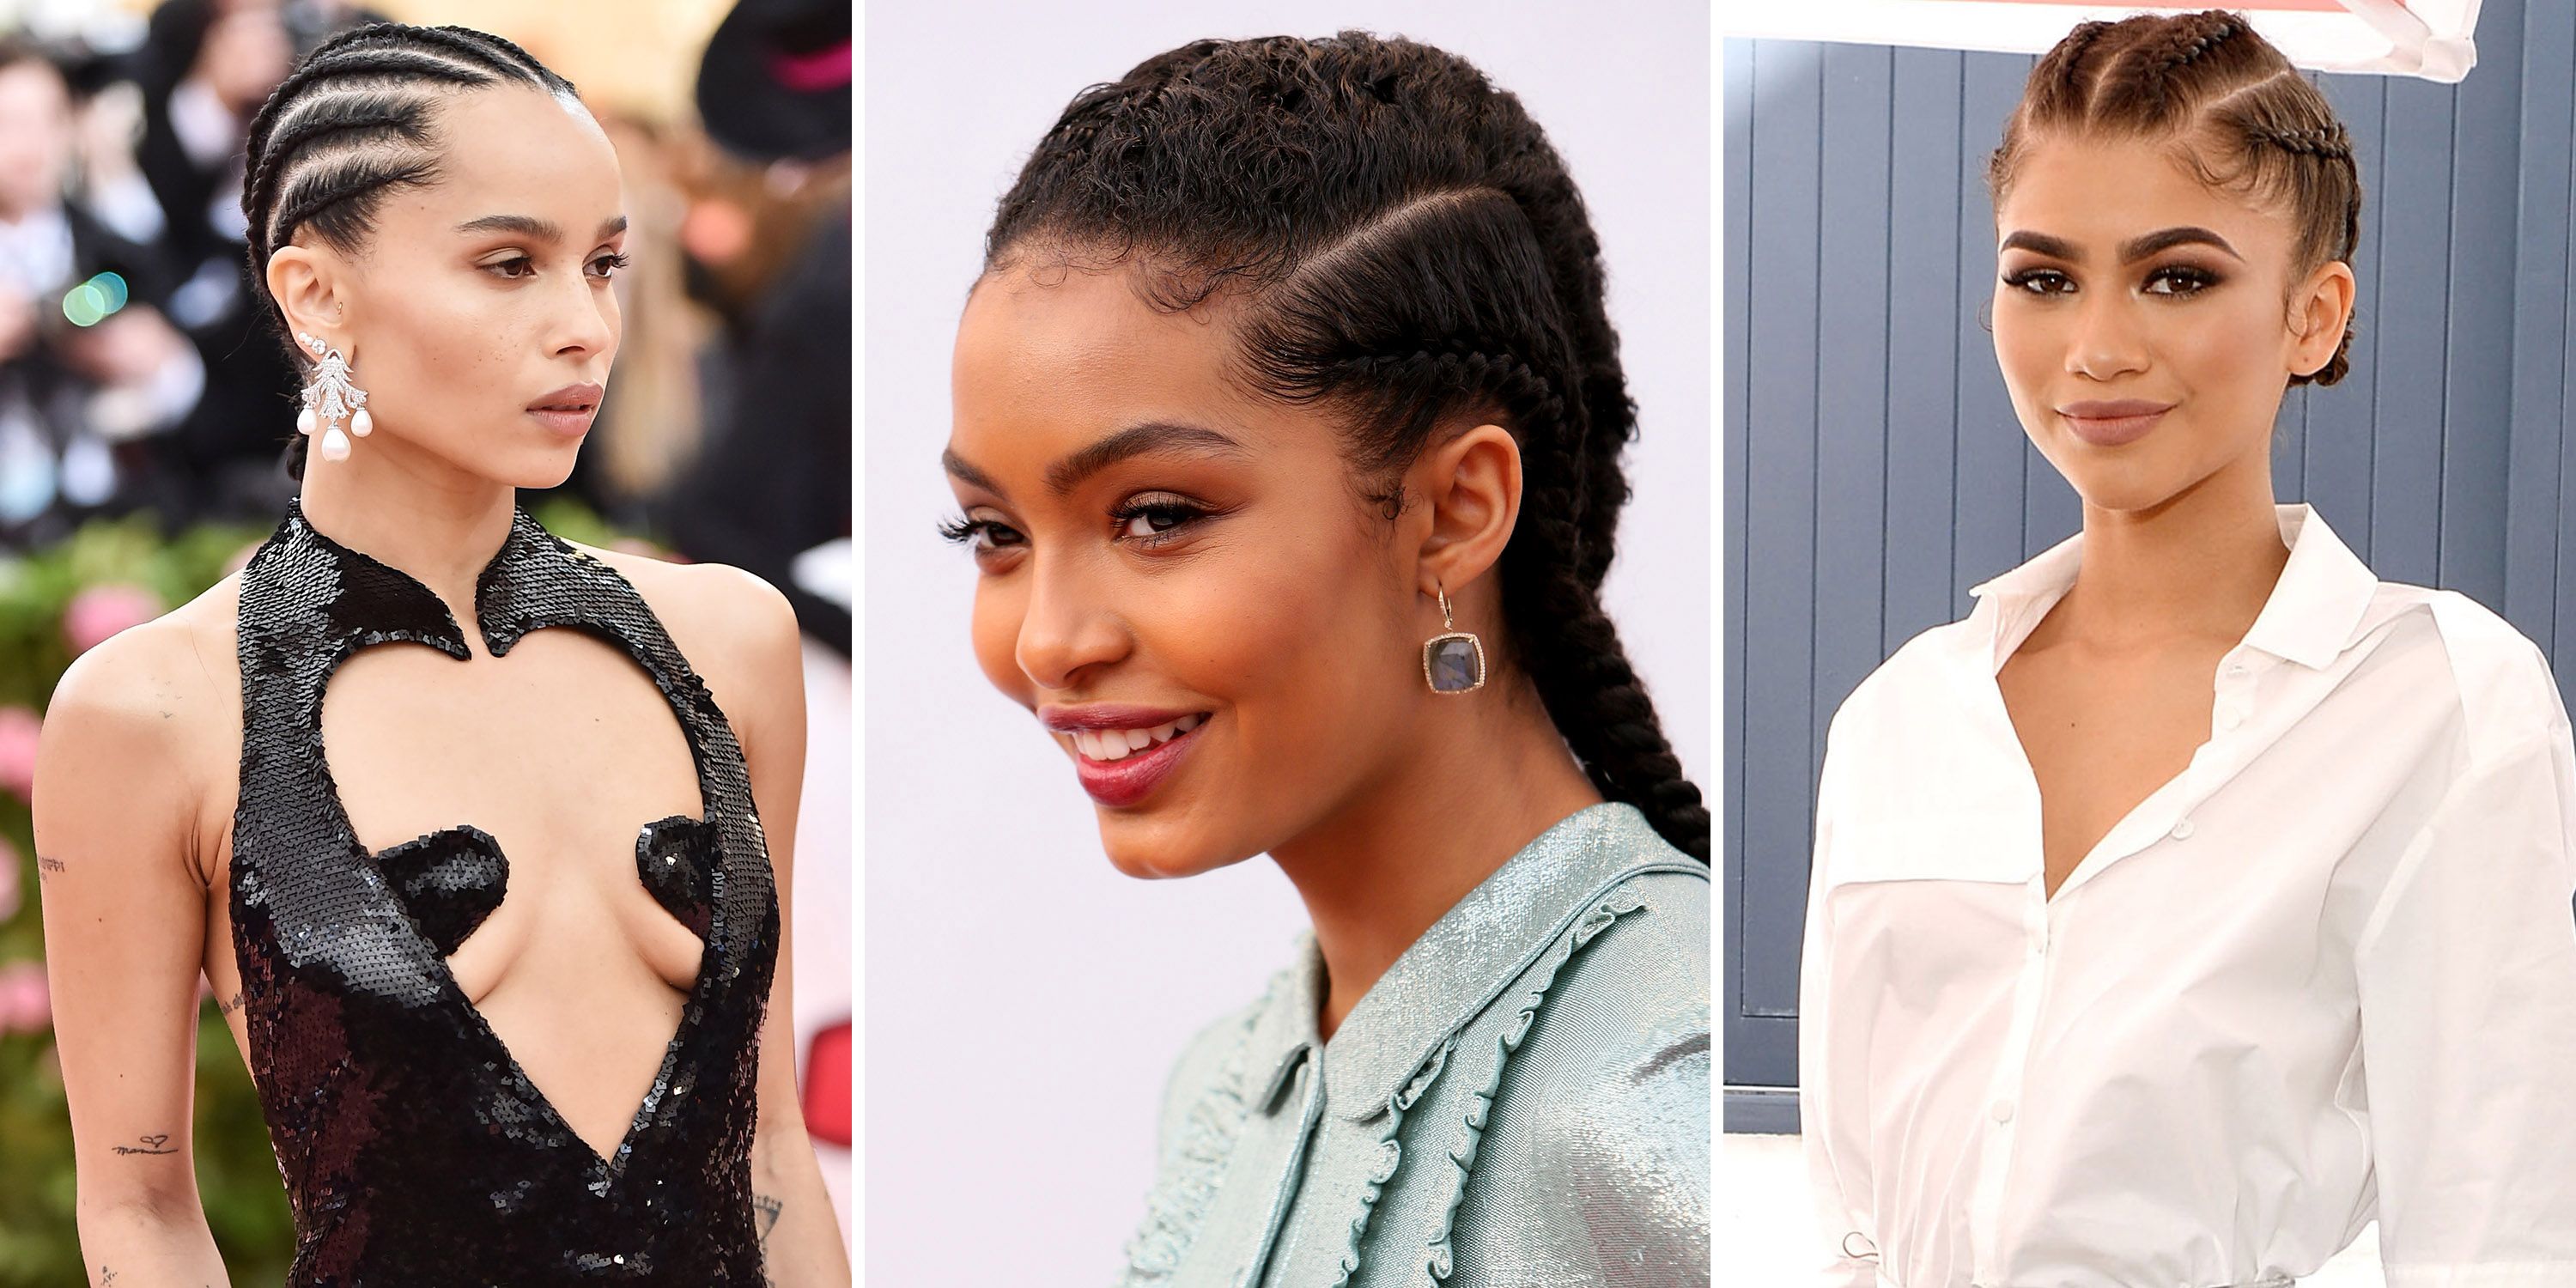 Designer Cornrows Is the Braided Hairstyle Trend of 2022  POPSUGAR Beauty